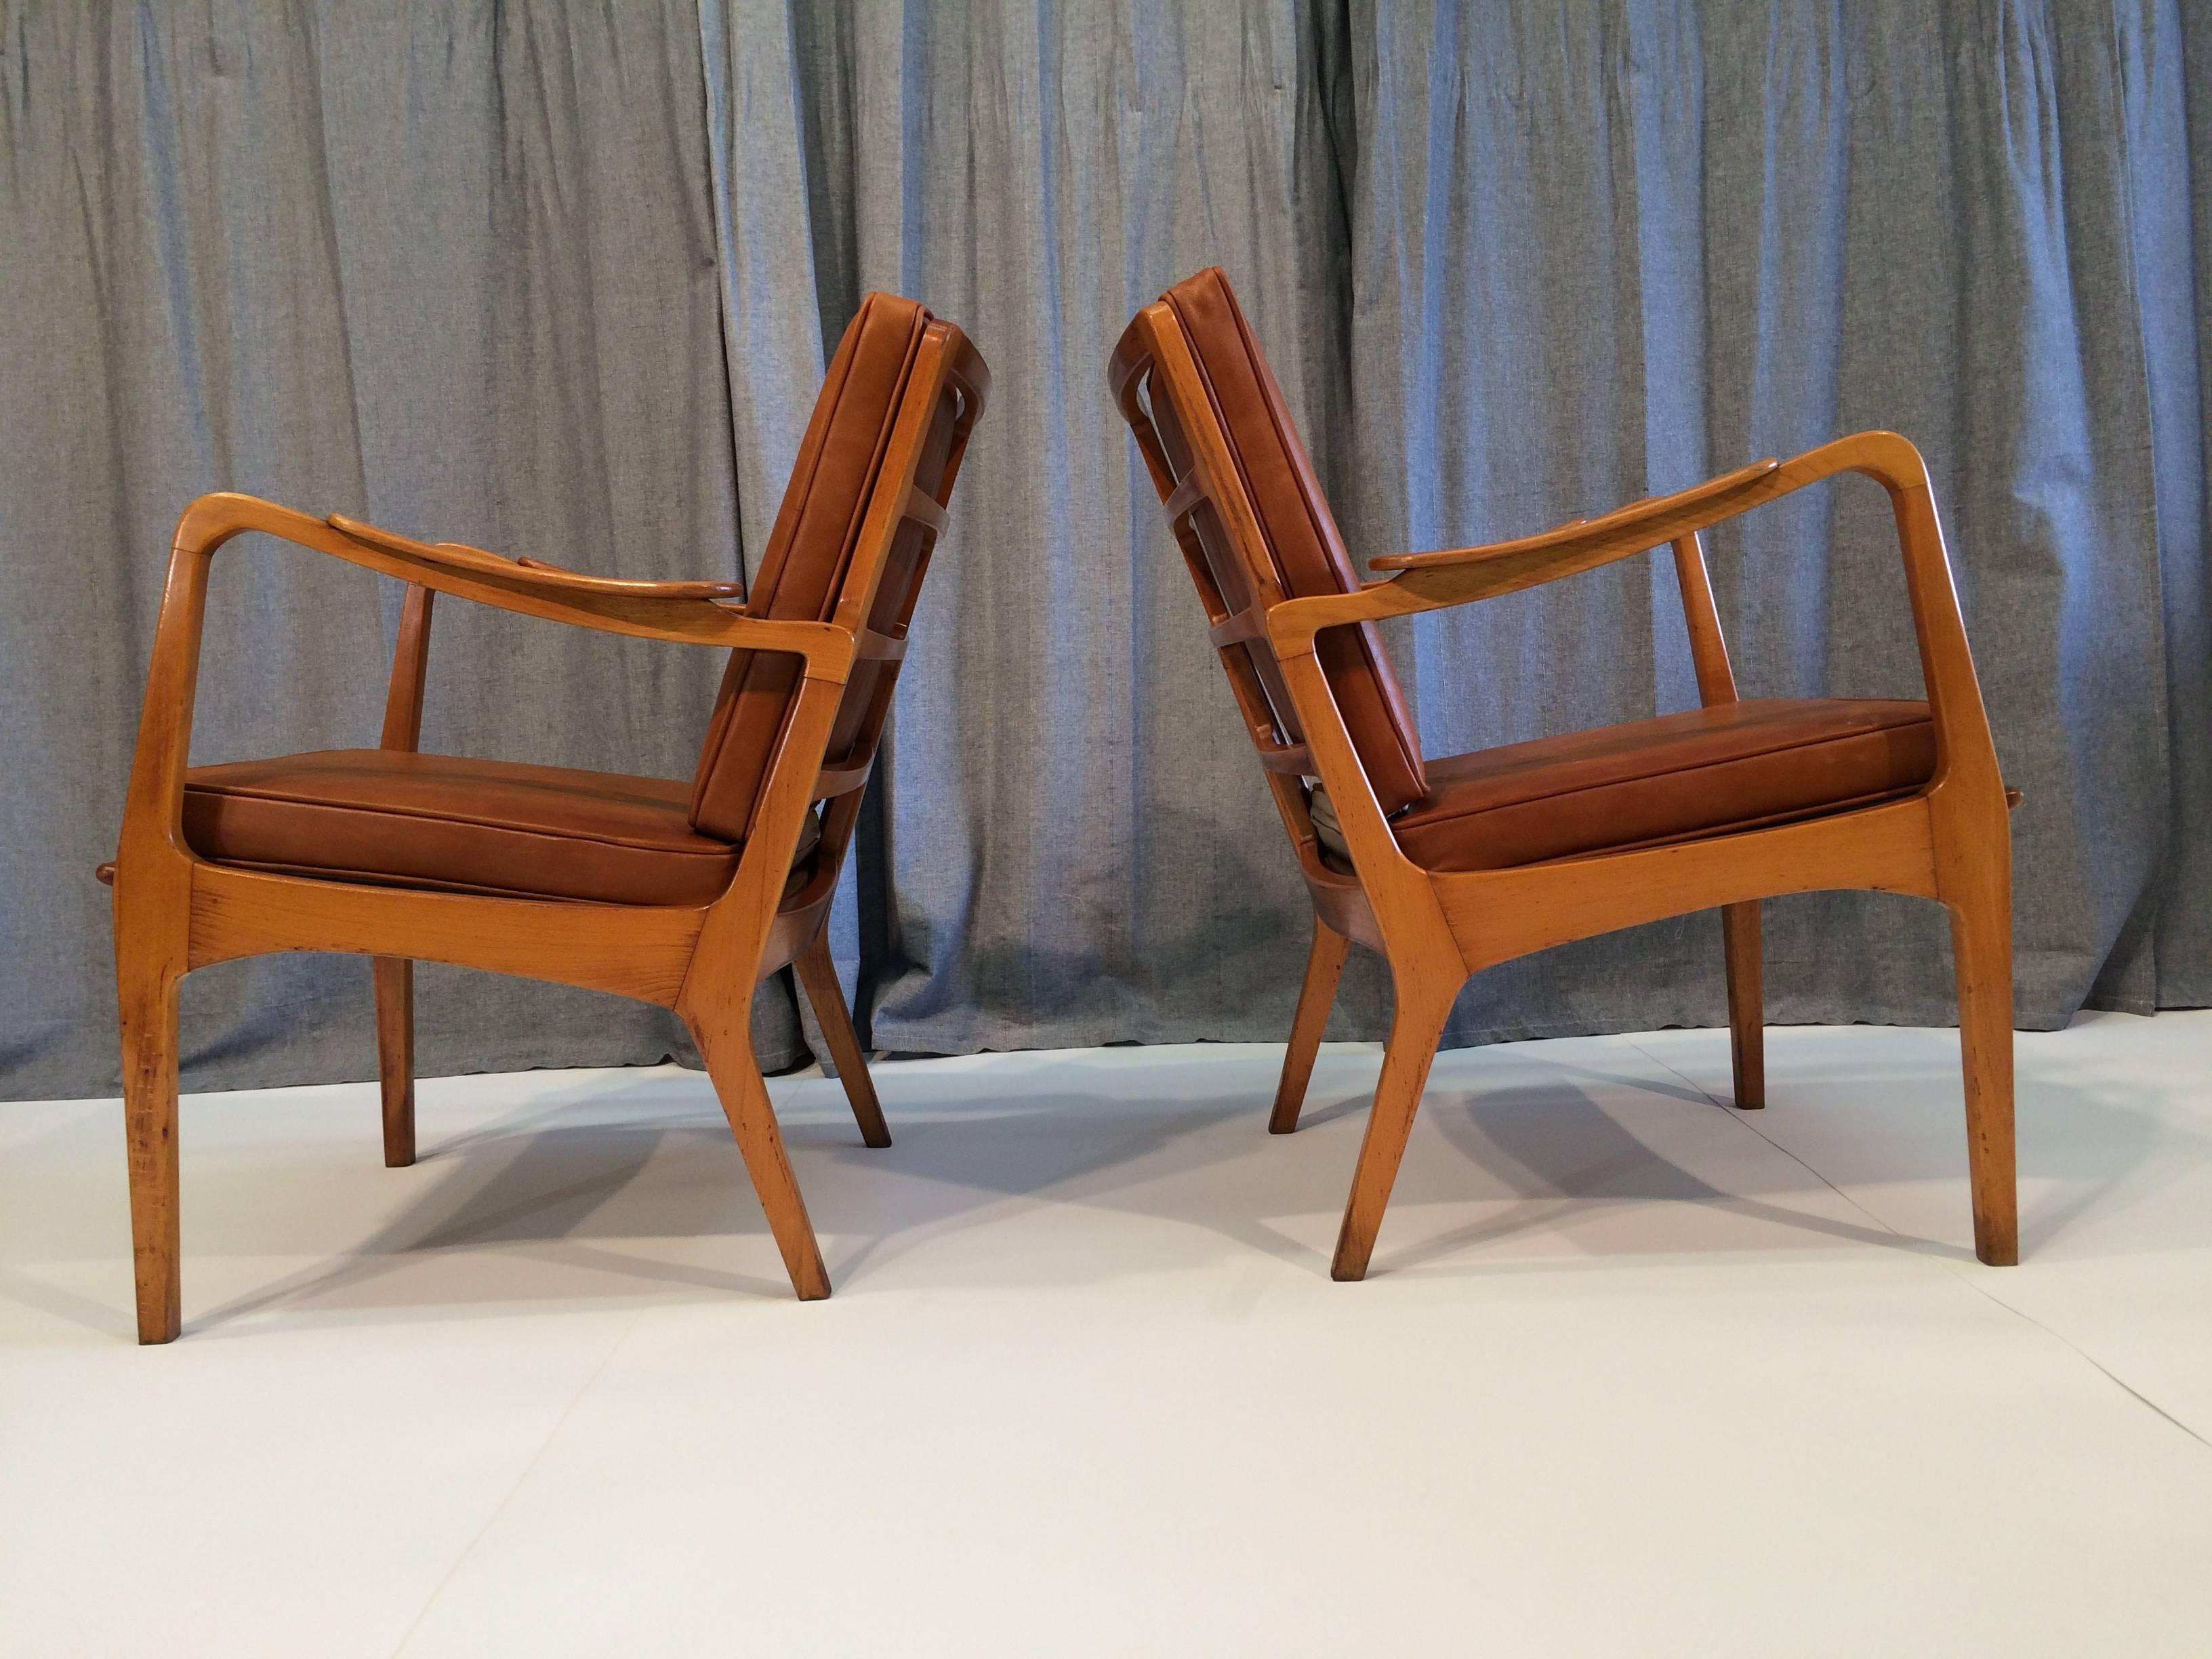 Beautiful Pair of Danish Armchairs, Denmark, 1950s Birch and Cognac Leather 2